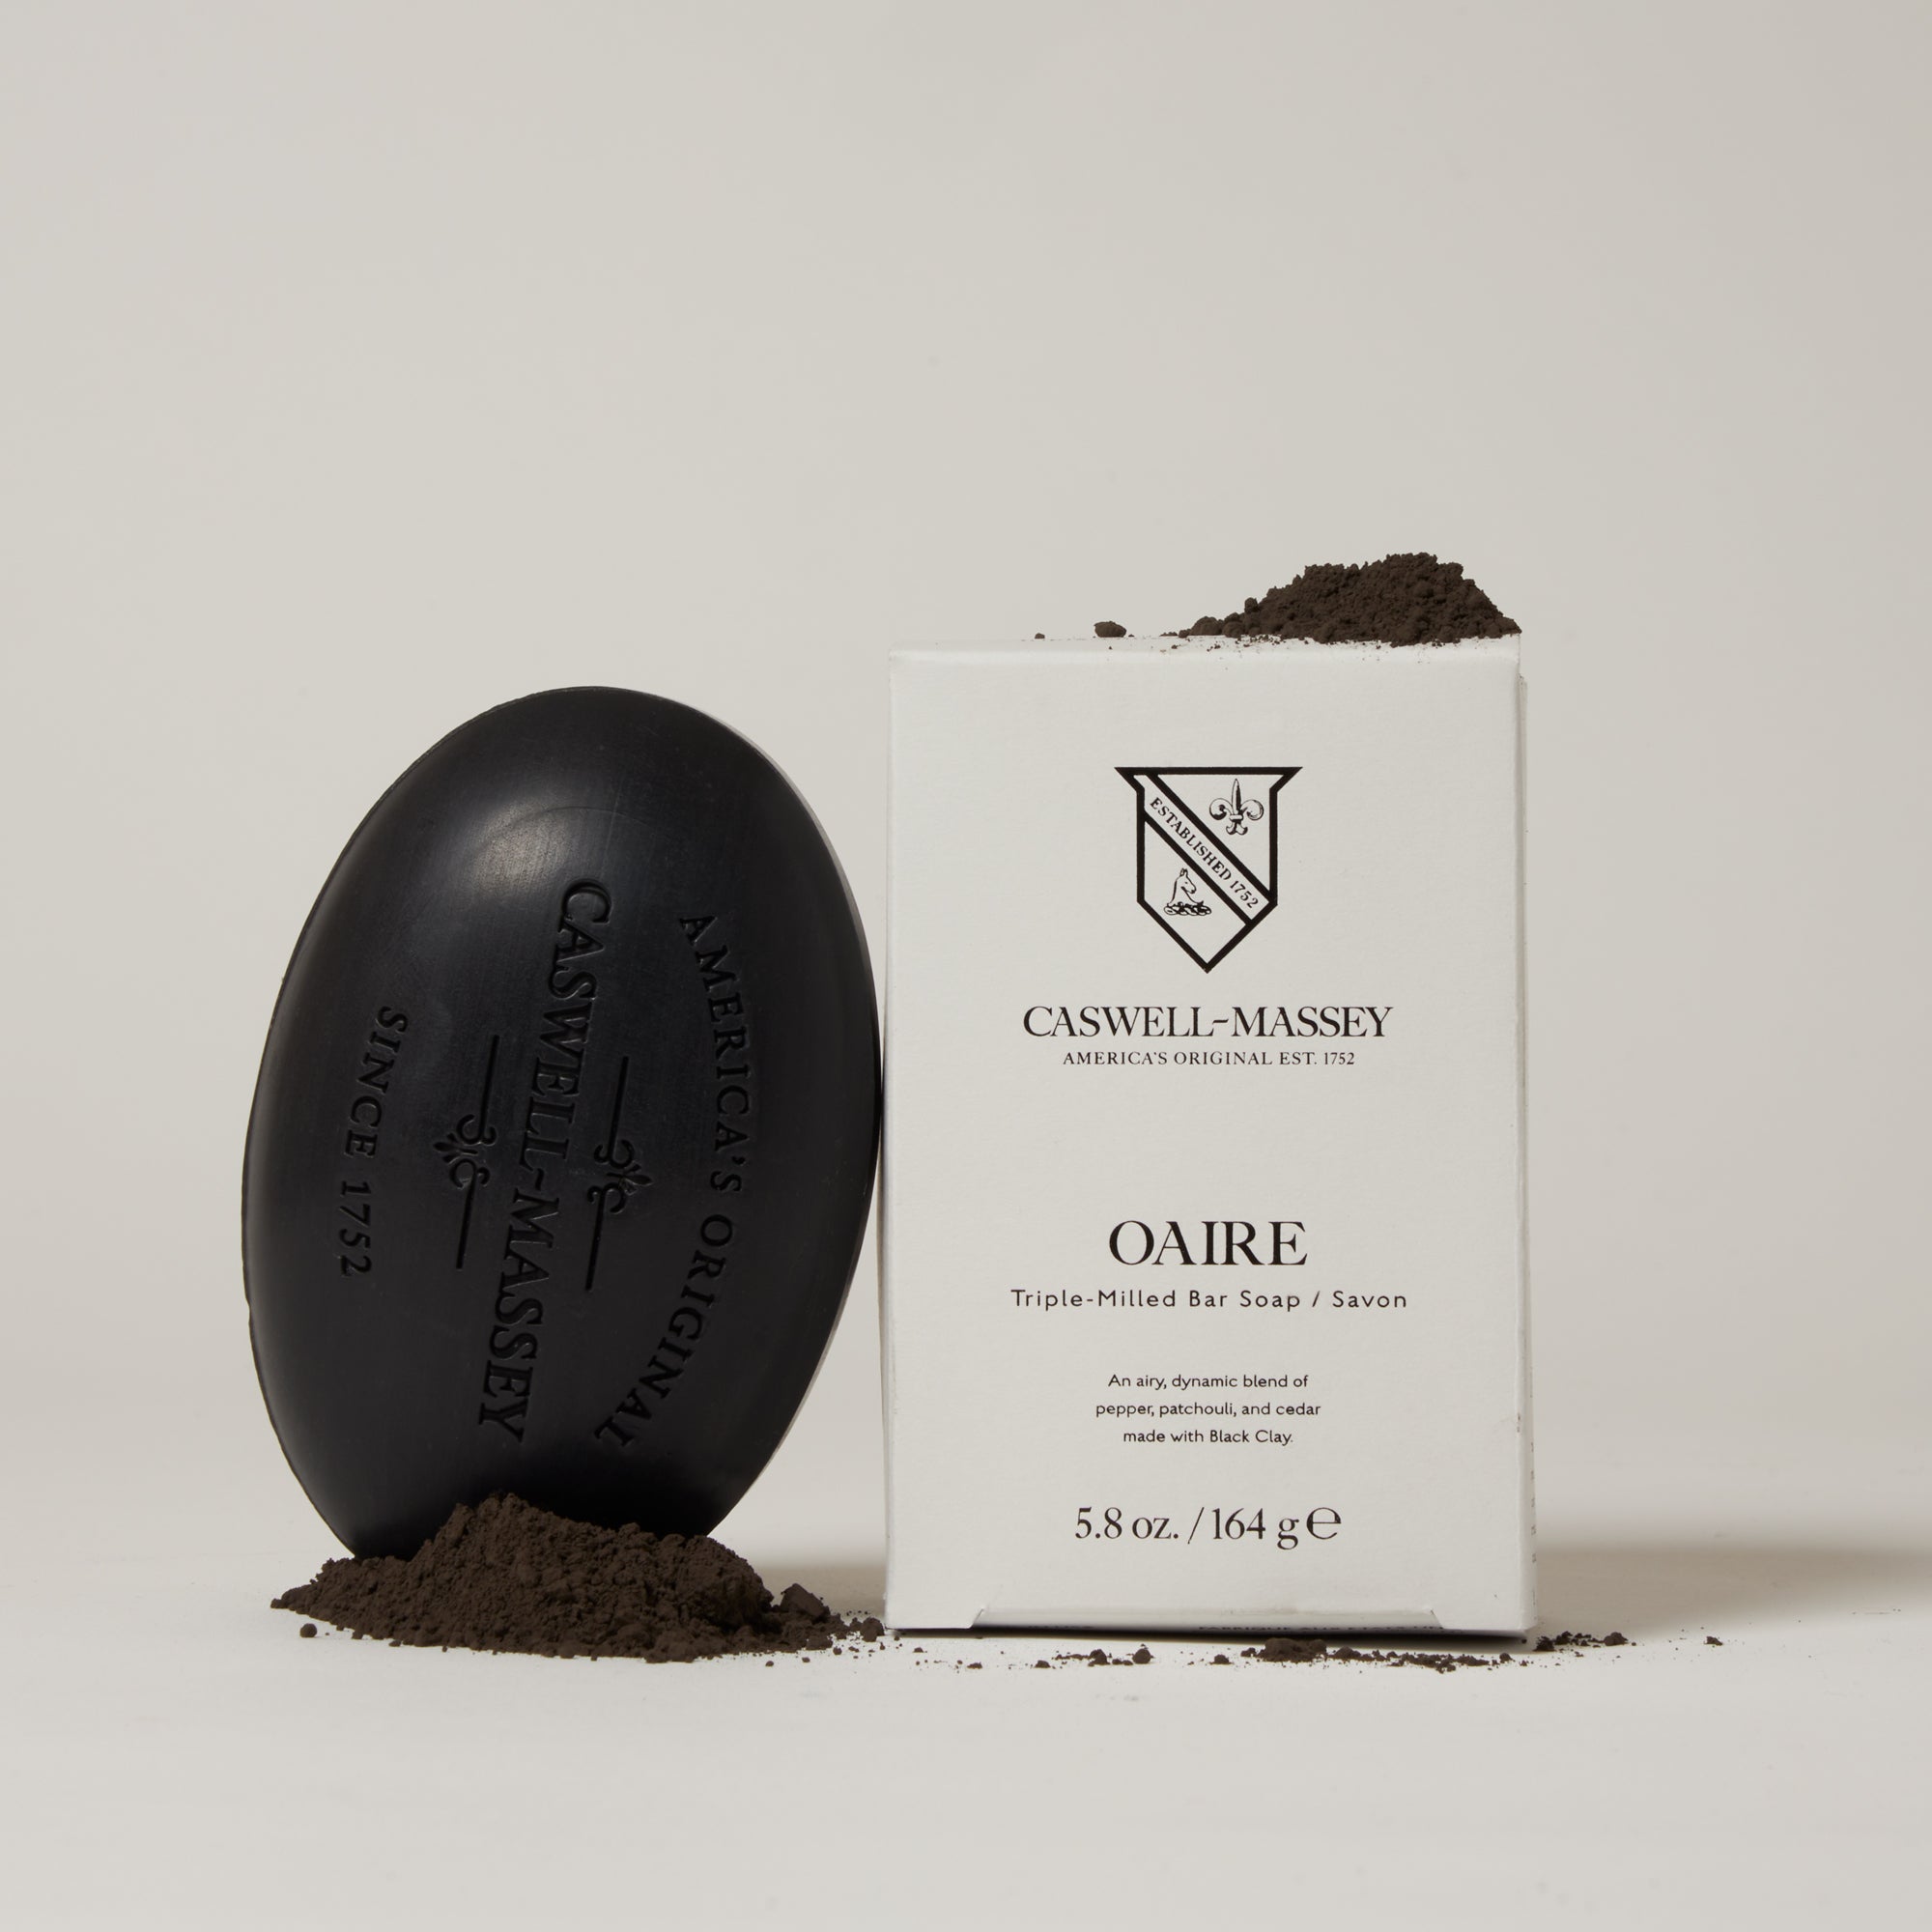 Caswell-Massey Oaire Bar Soap shown next to its outer packaging